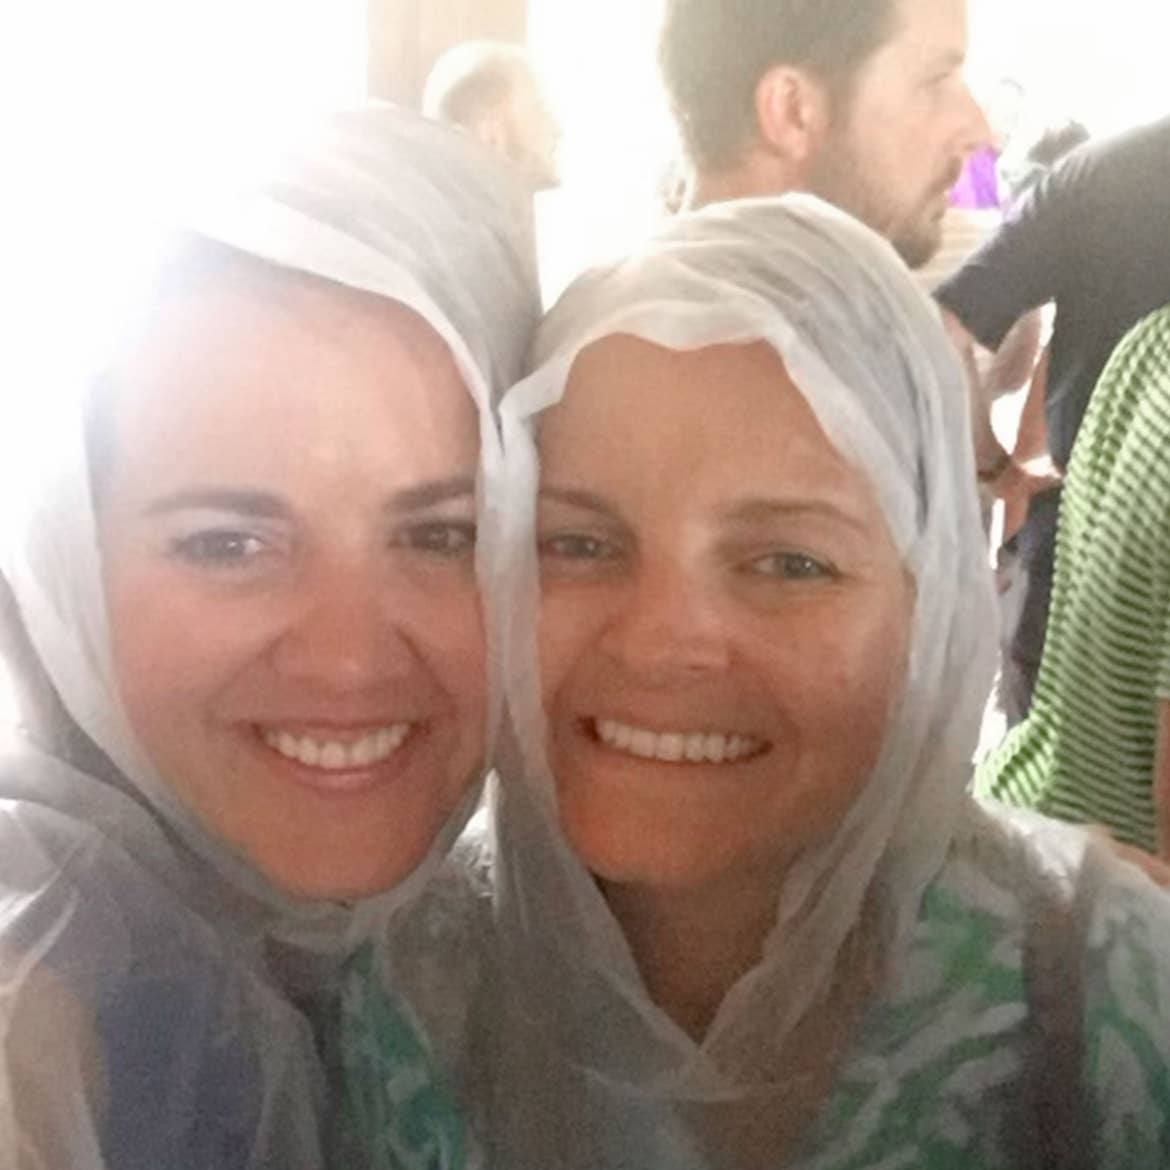 Editor-in-chief, Jenn C. Harmon (left) stands with a friend wearing white ponchos under a roof as it rains in the background.